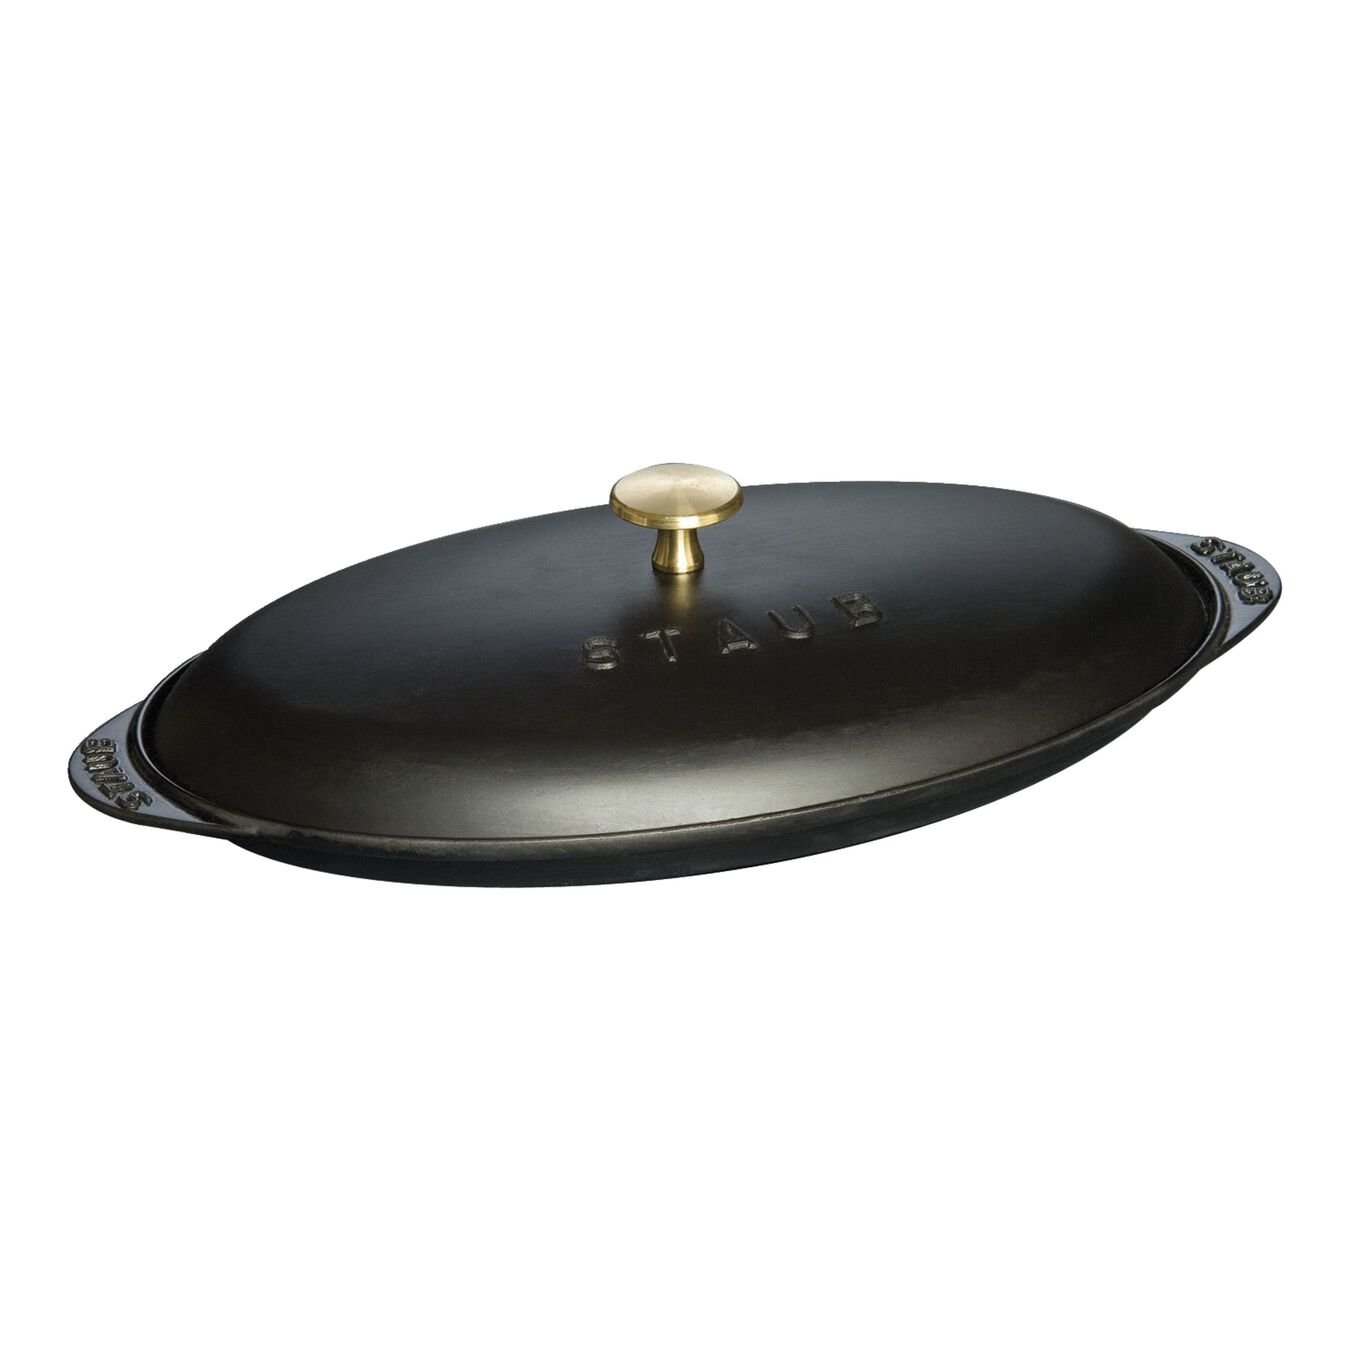  cast iron oval Oven dish with lid, black - Visual Imperfections,,large 1